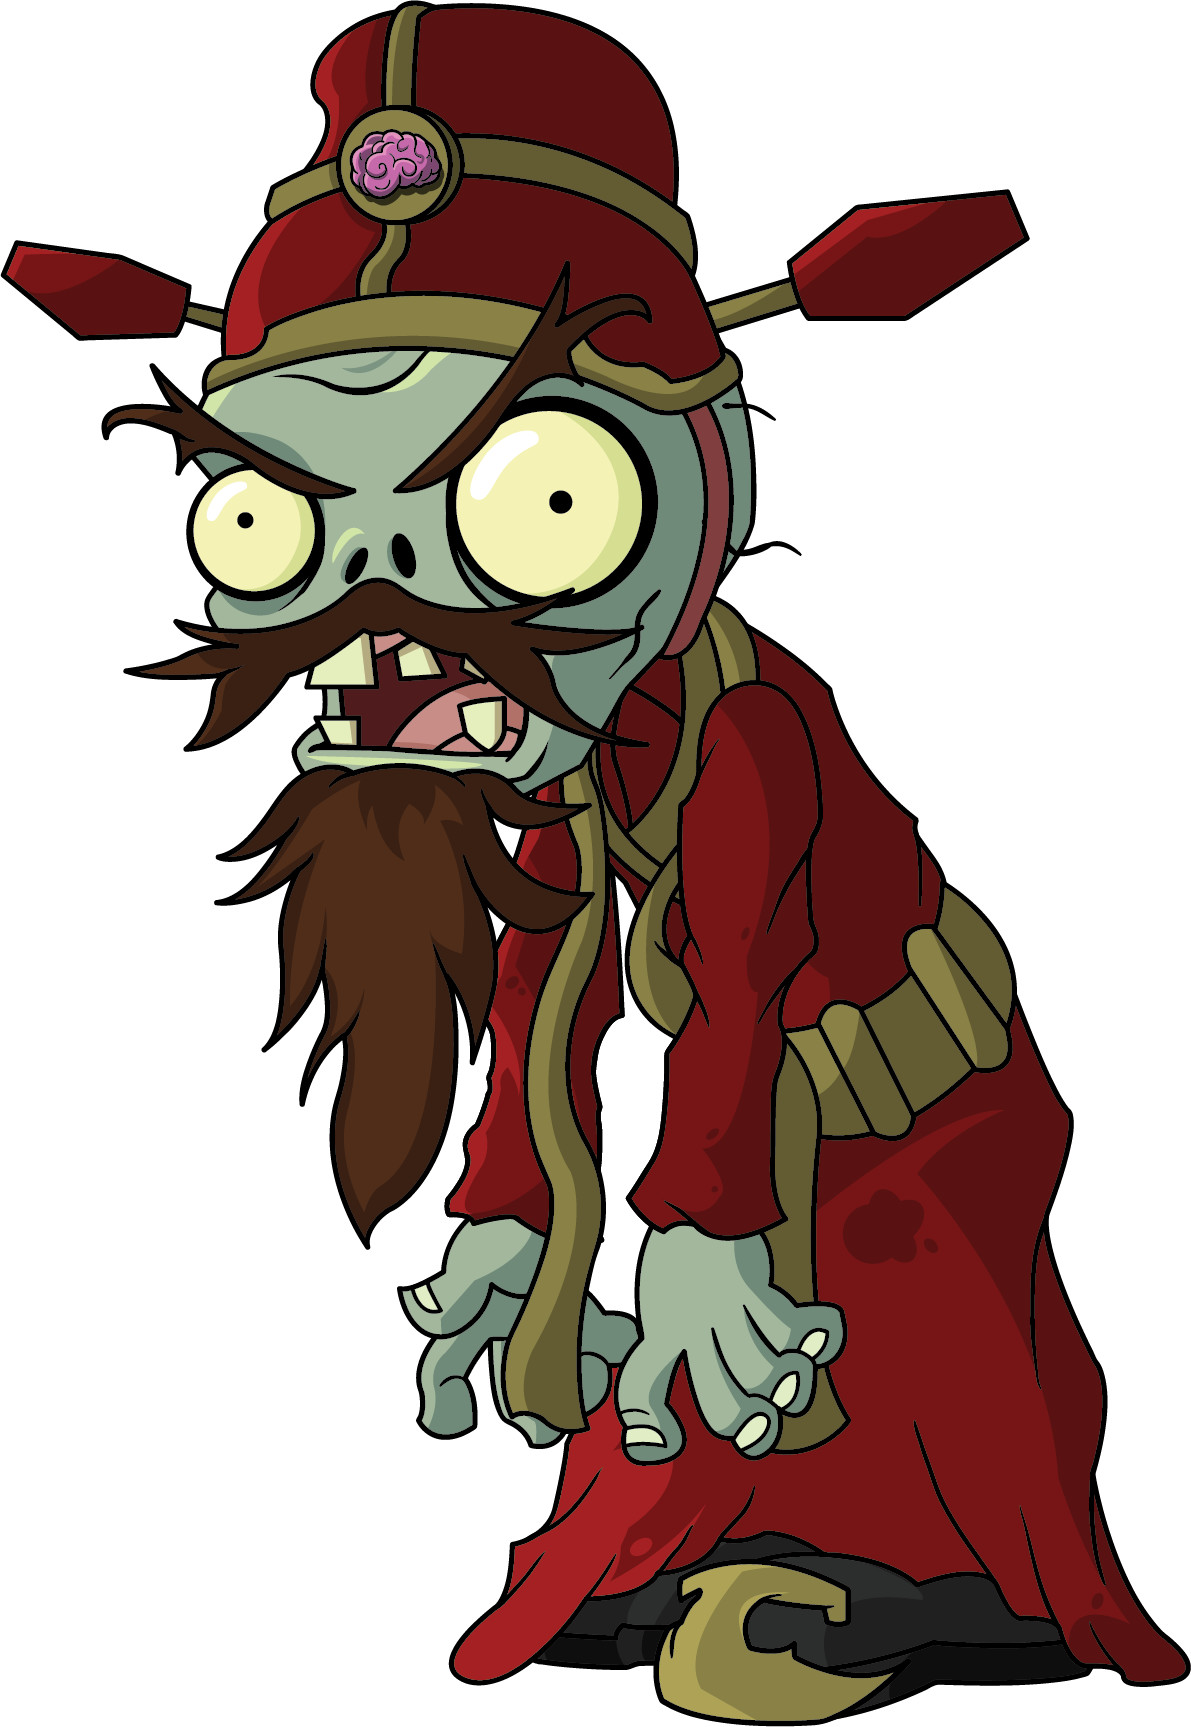 plants vs zombies 2 new zombie characters